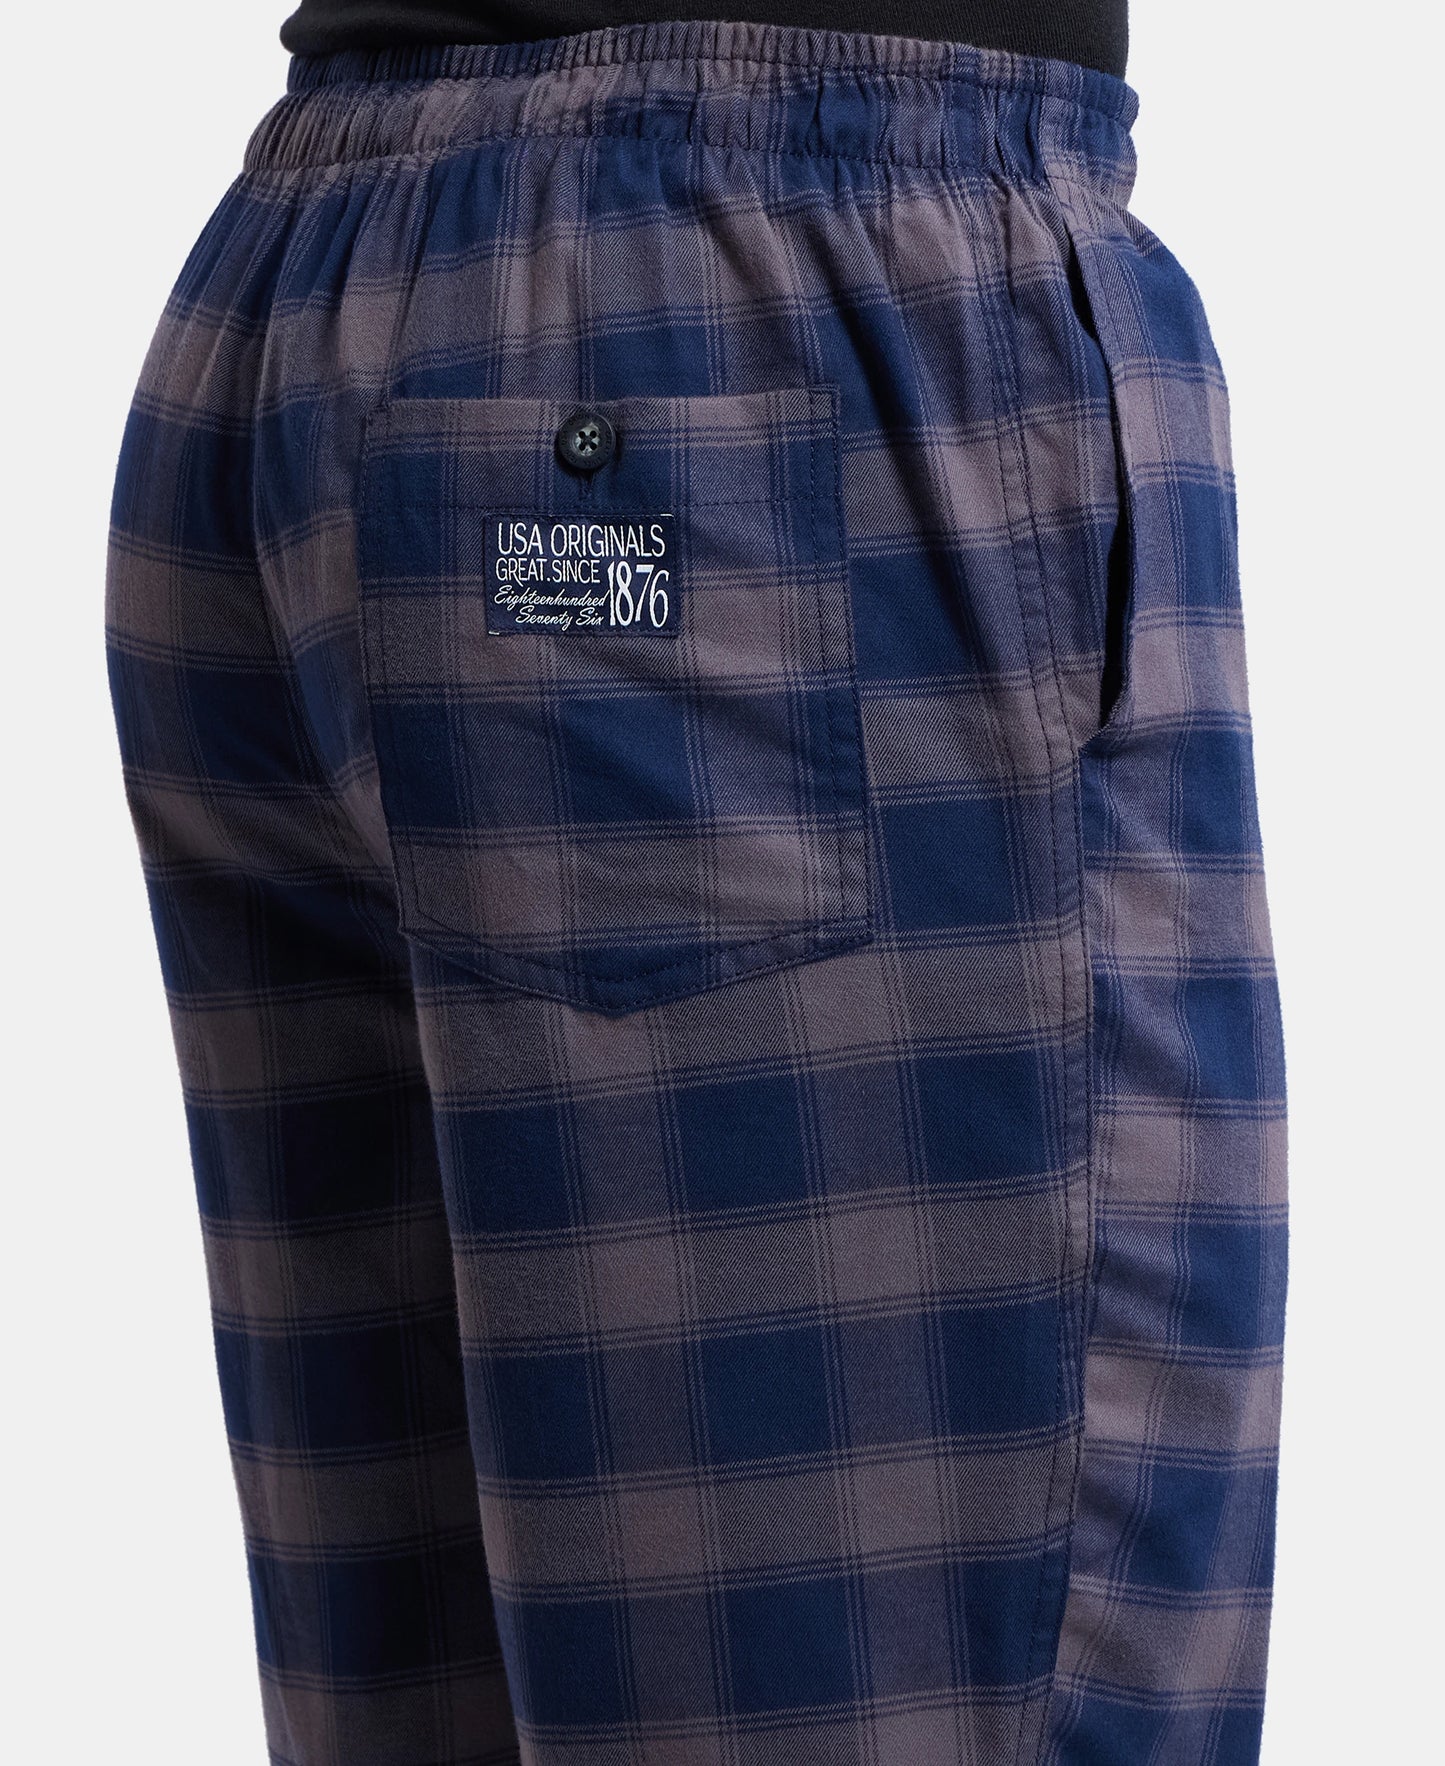 Super Combed Mercerized Cotton Woven Fabric Bermuda with Side Pockets - Charcoal & Navy-7